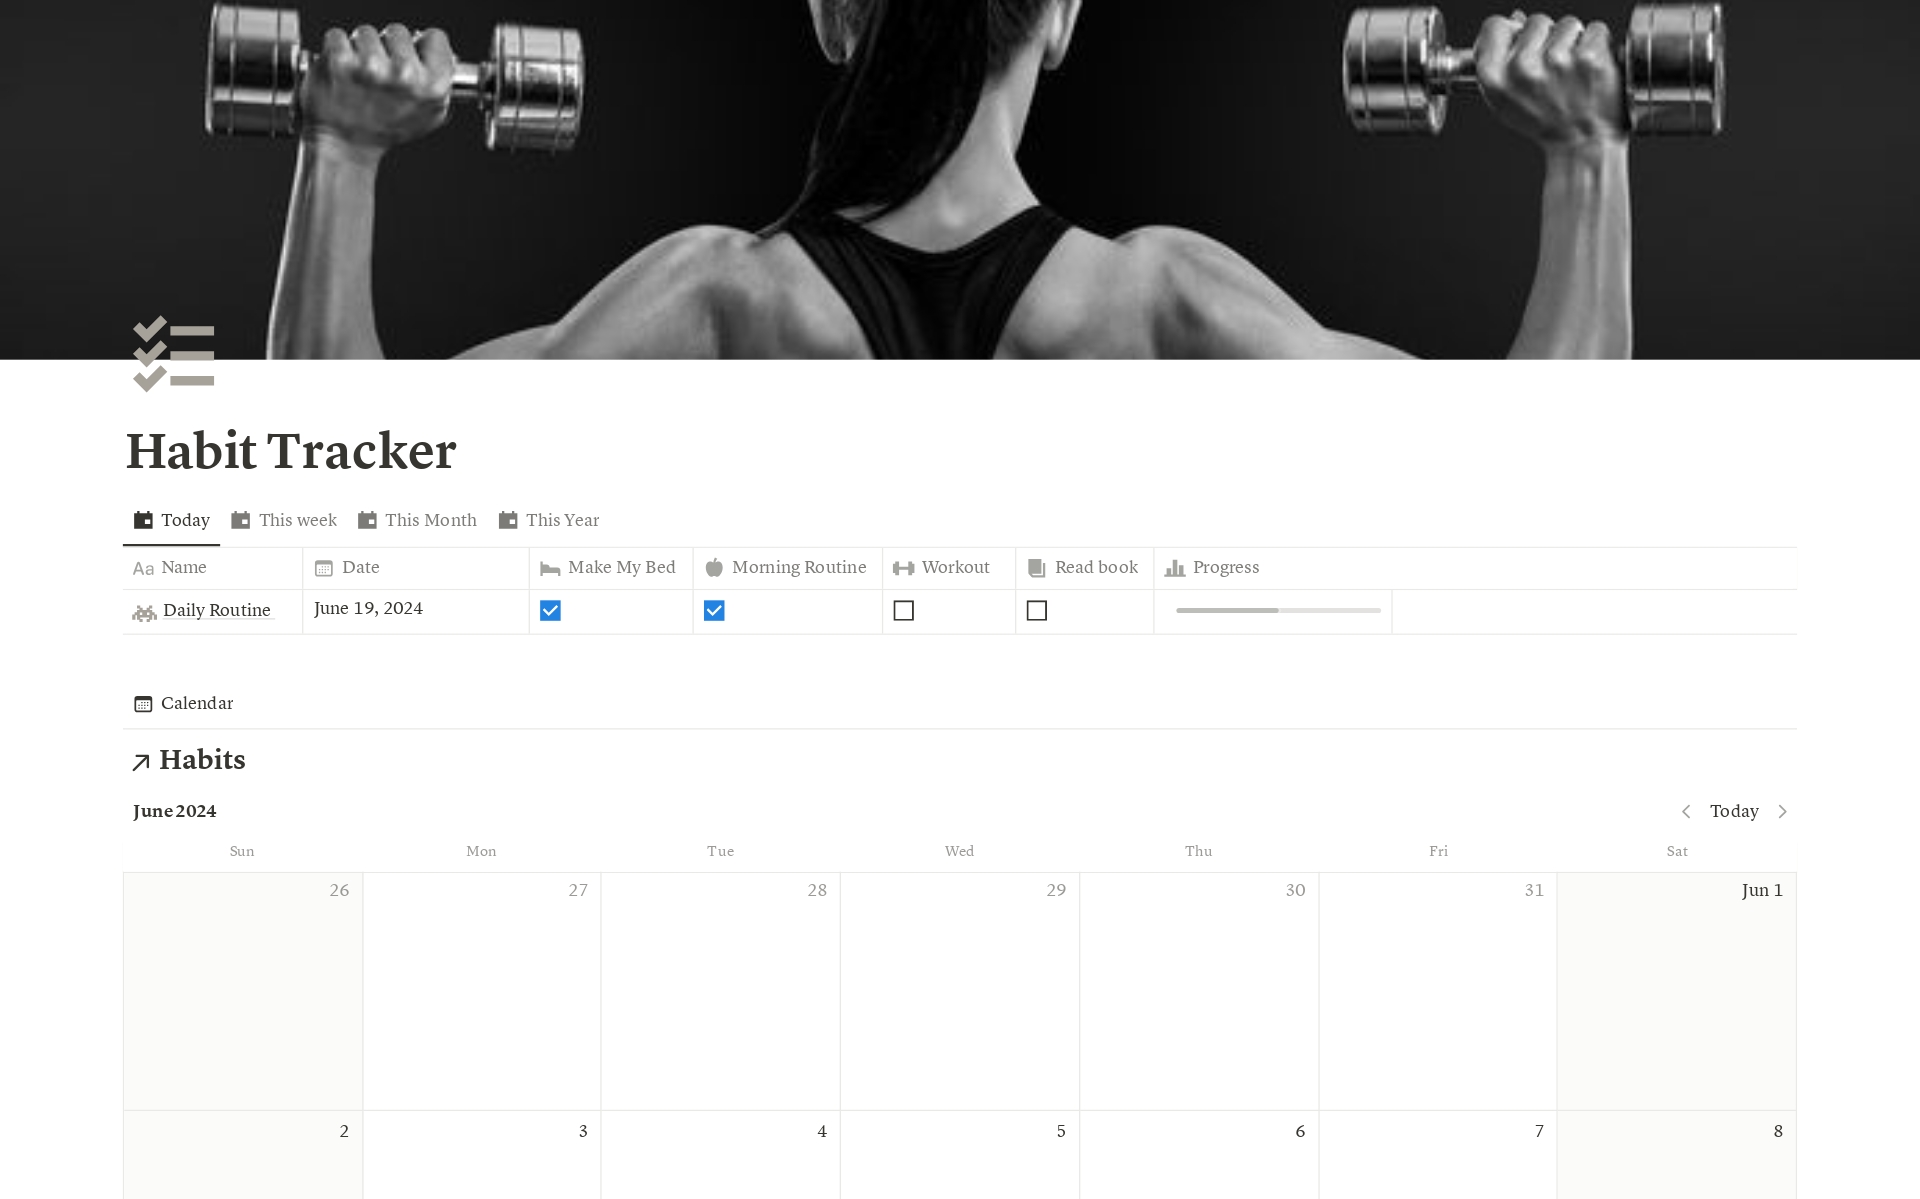 Boost your productivity and cultivate positive habits with our Habit Tracker Notion Template. This user-friendly and customizable tool helps you set goals, track progress, and stay motivated on your journey to self-improvement.